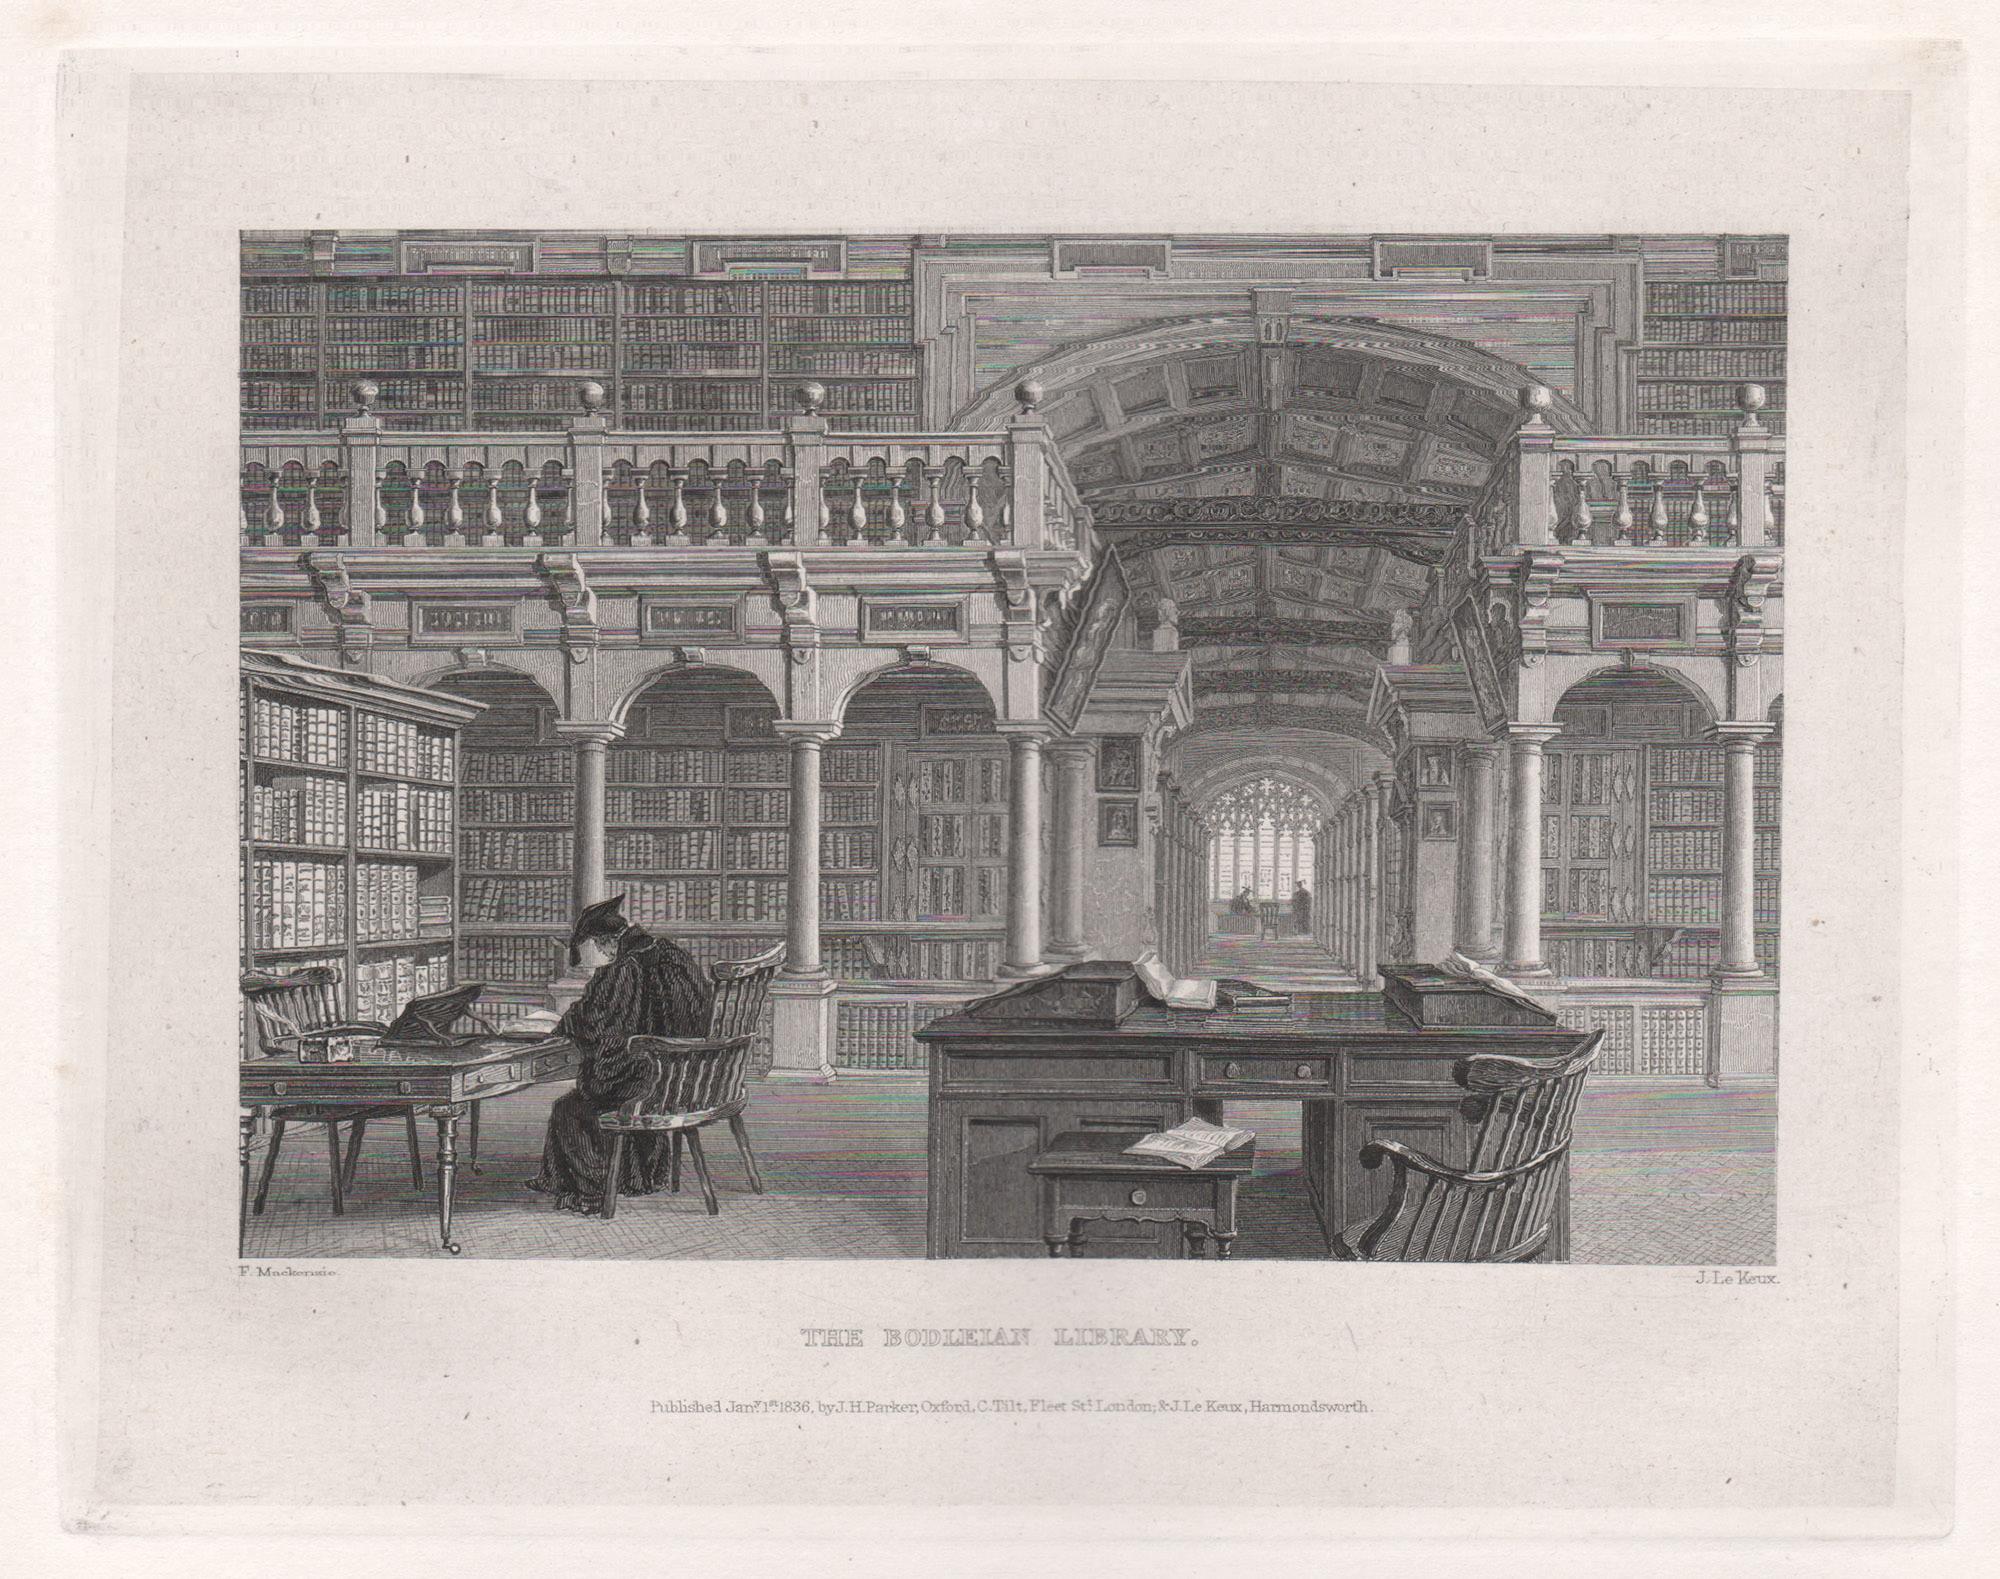 The Bodleian Library. Oxford University. Antique English 19th century engraving